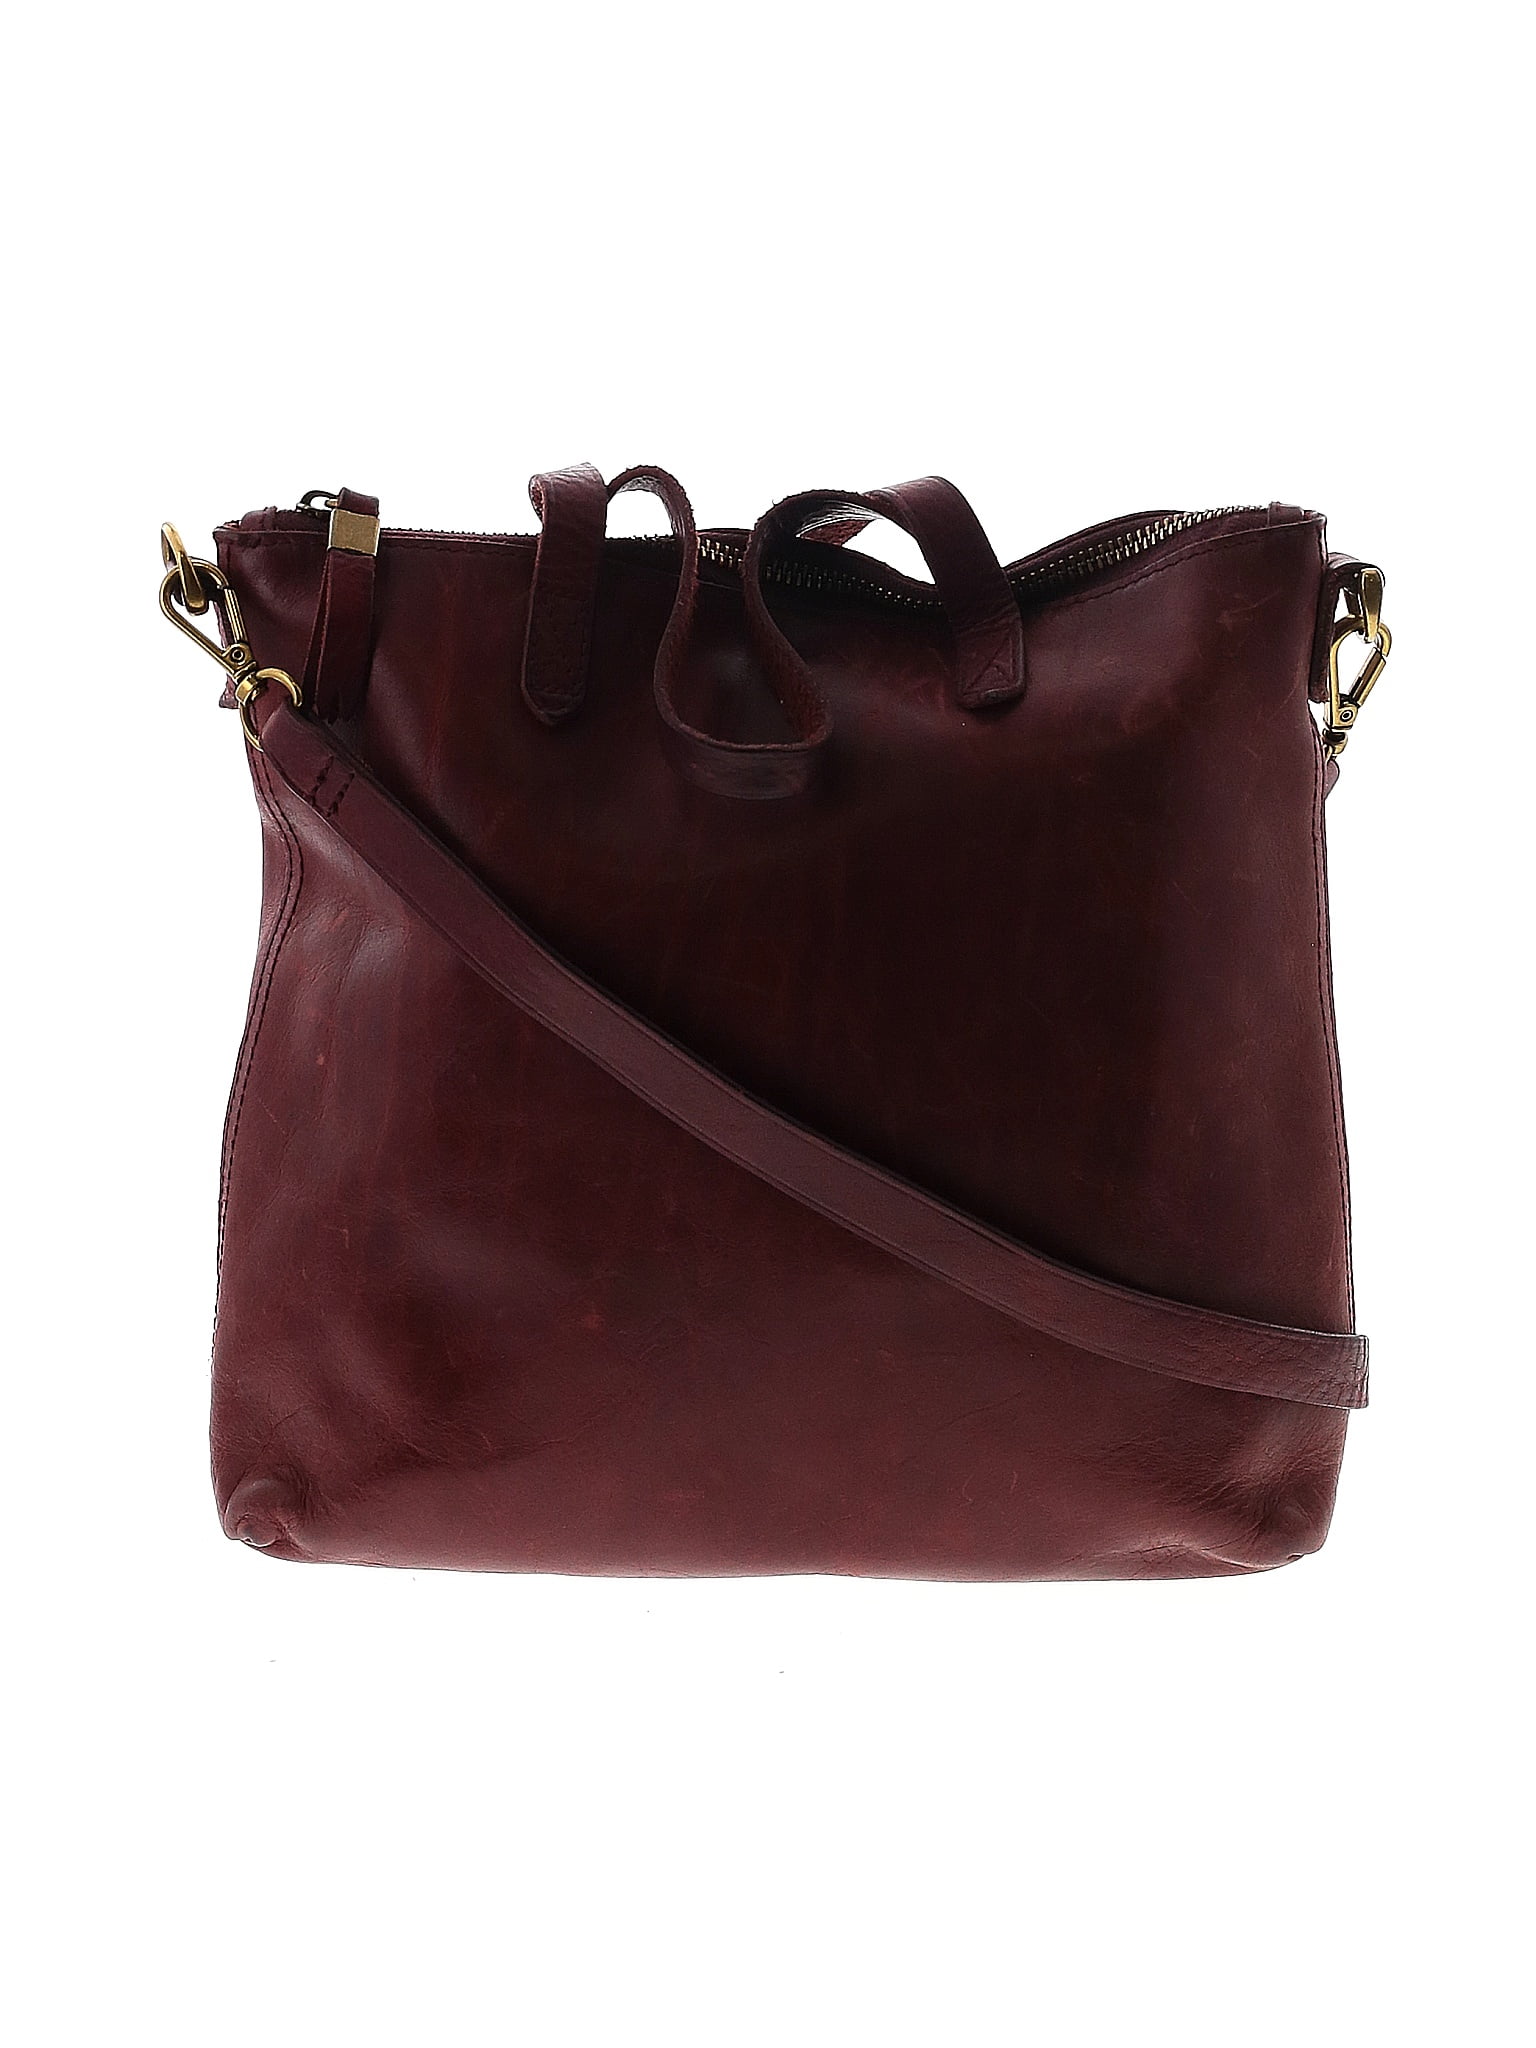 Madewell Transport Tote in Dark Cabernet, Women's Fashion, Bags